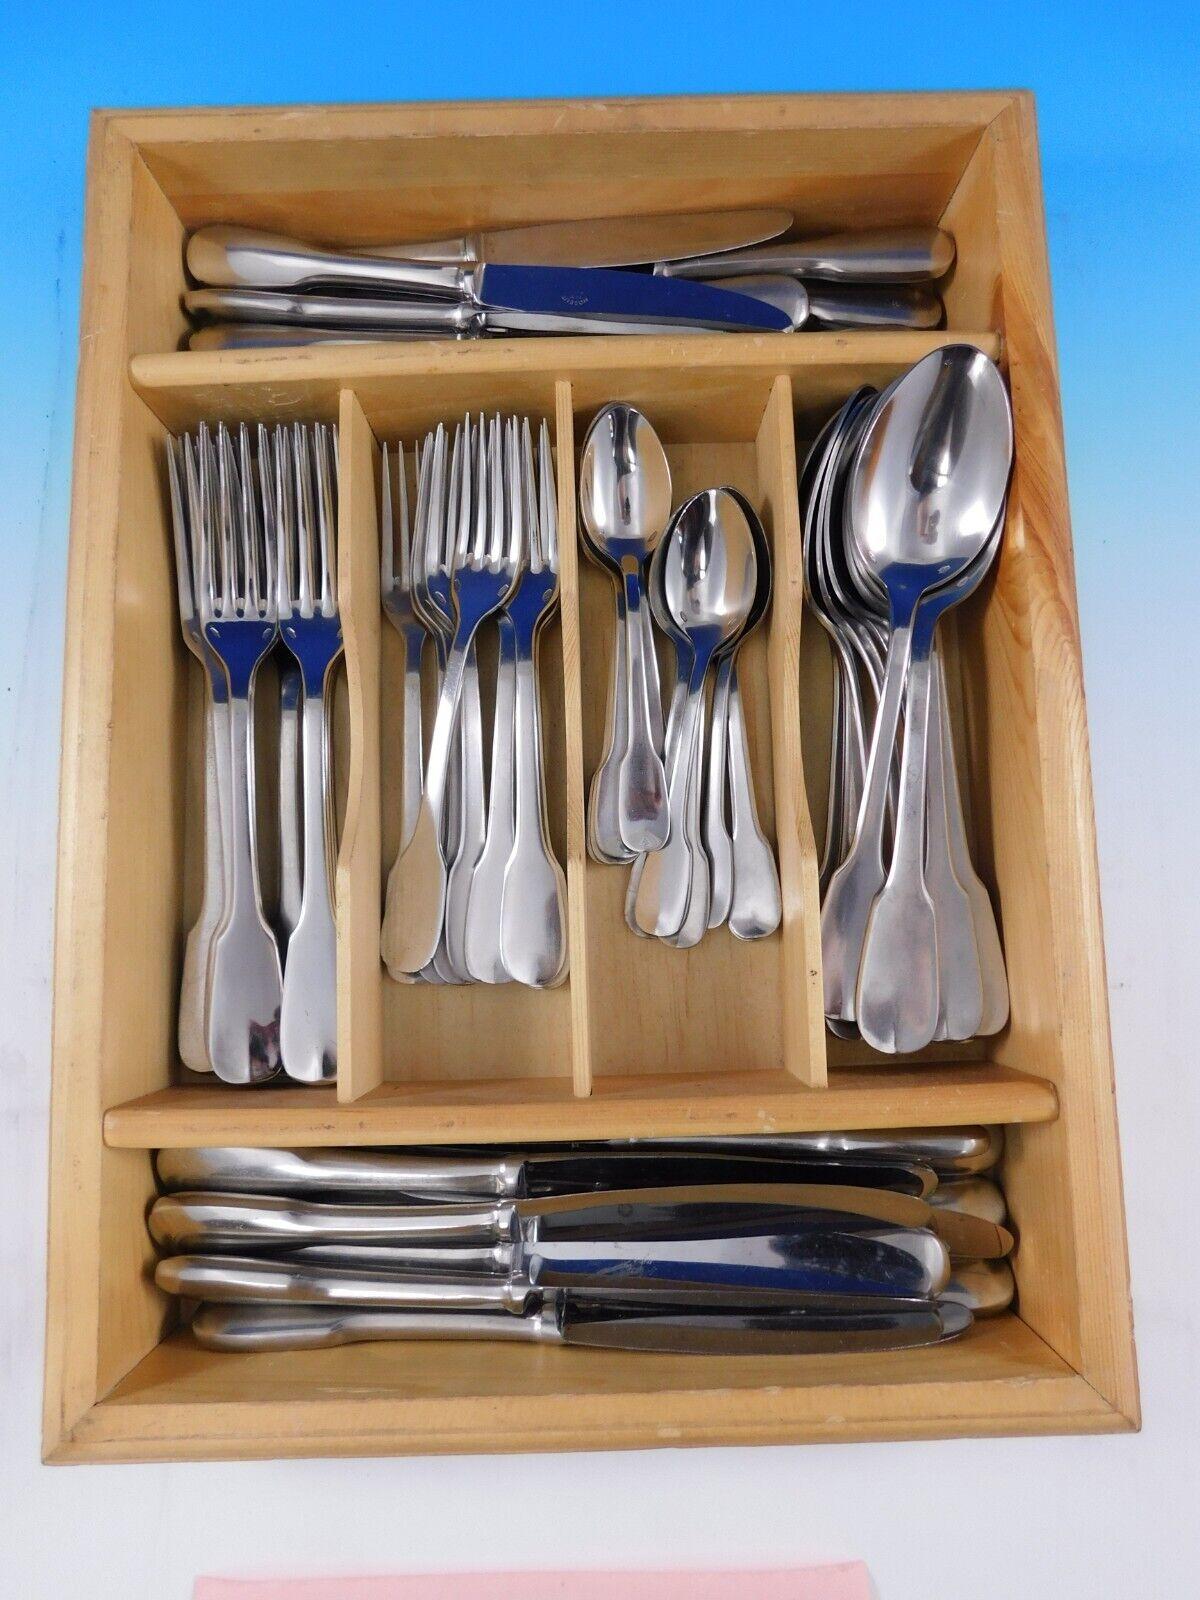 Fiddle by Novargent (France) Stainless Steel Flatware set - 72 pieces. This set includes:

12 Dinner Size Knives, 9 1/2